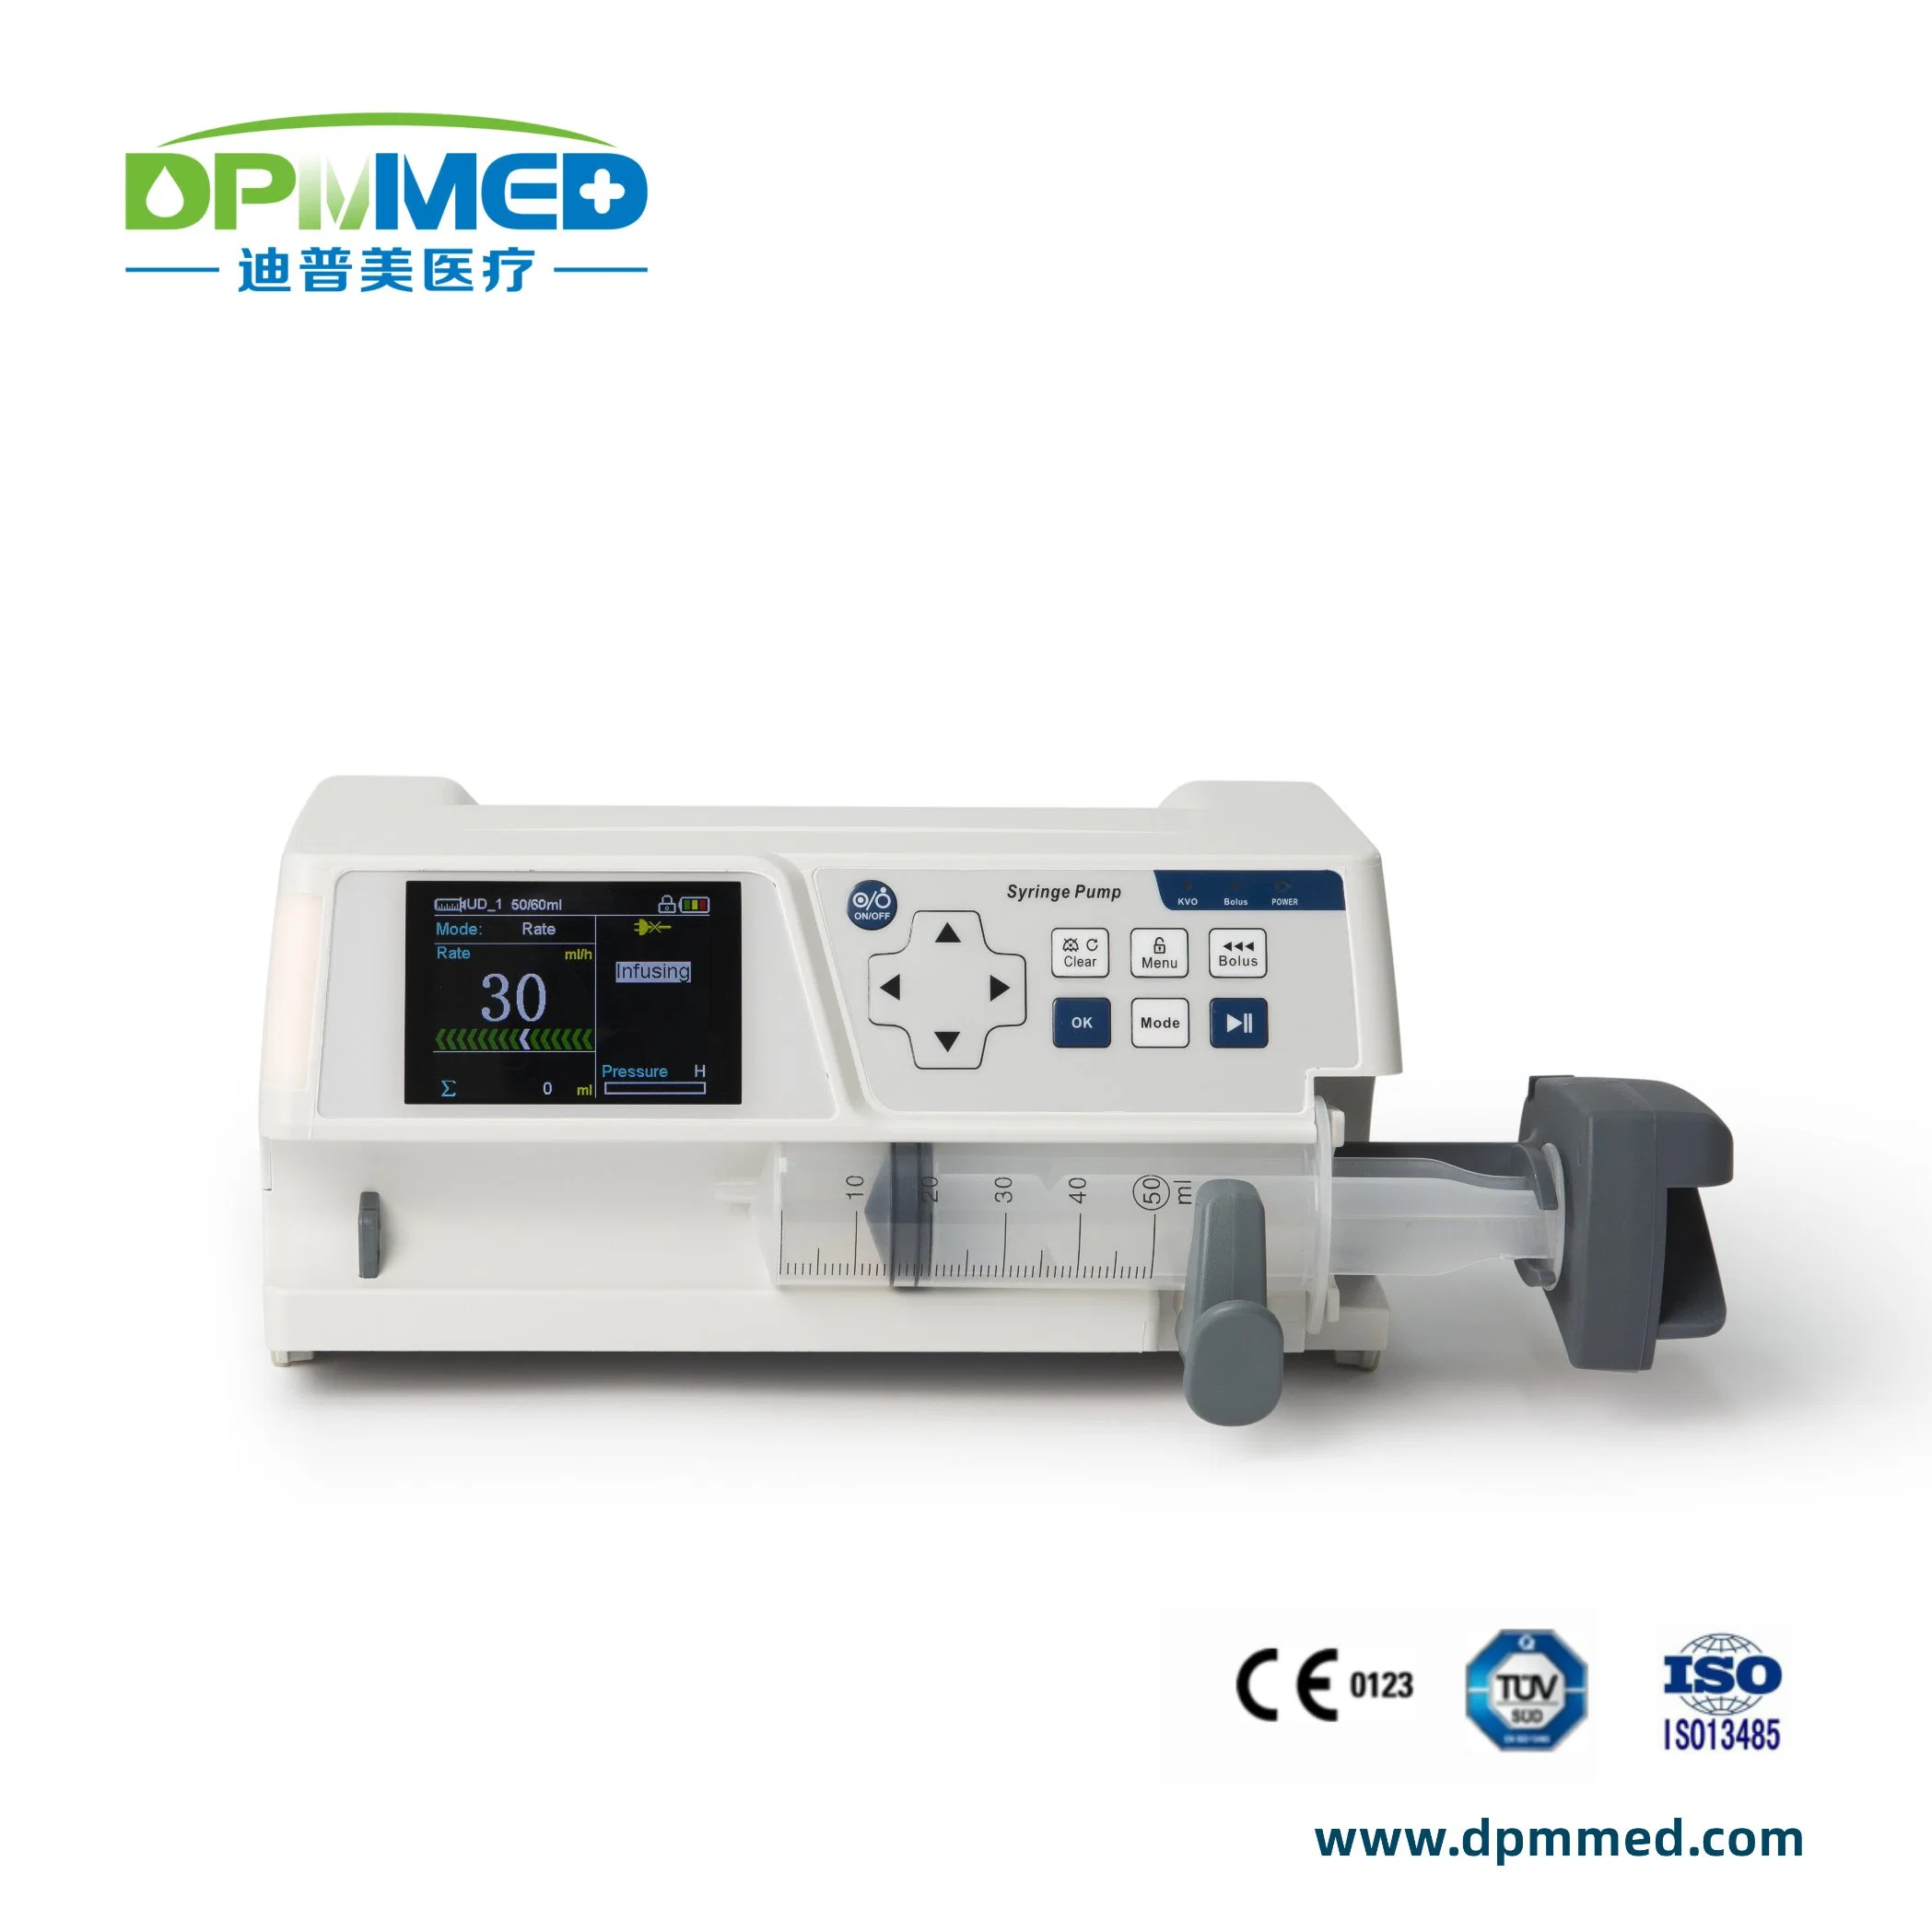 Medical Equipment Single Double Channel Syringe Pump for Hospital & Clinic Use